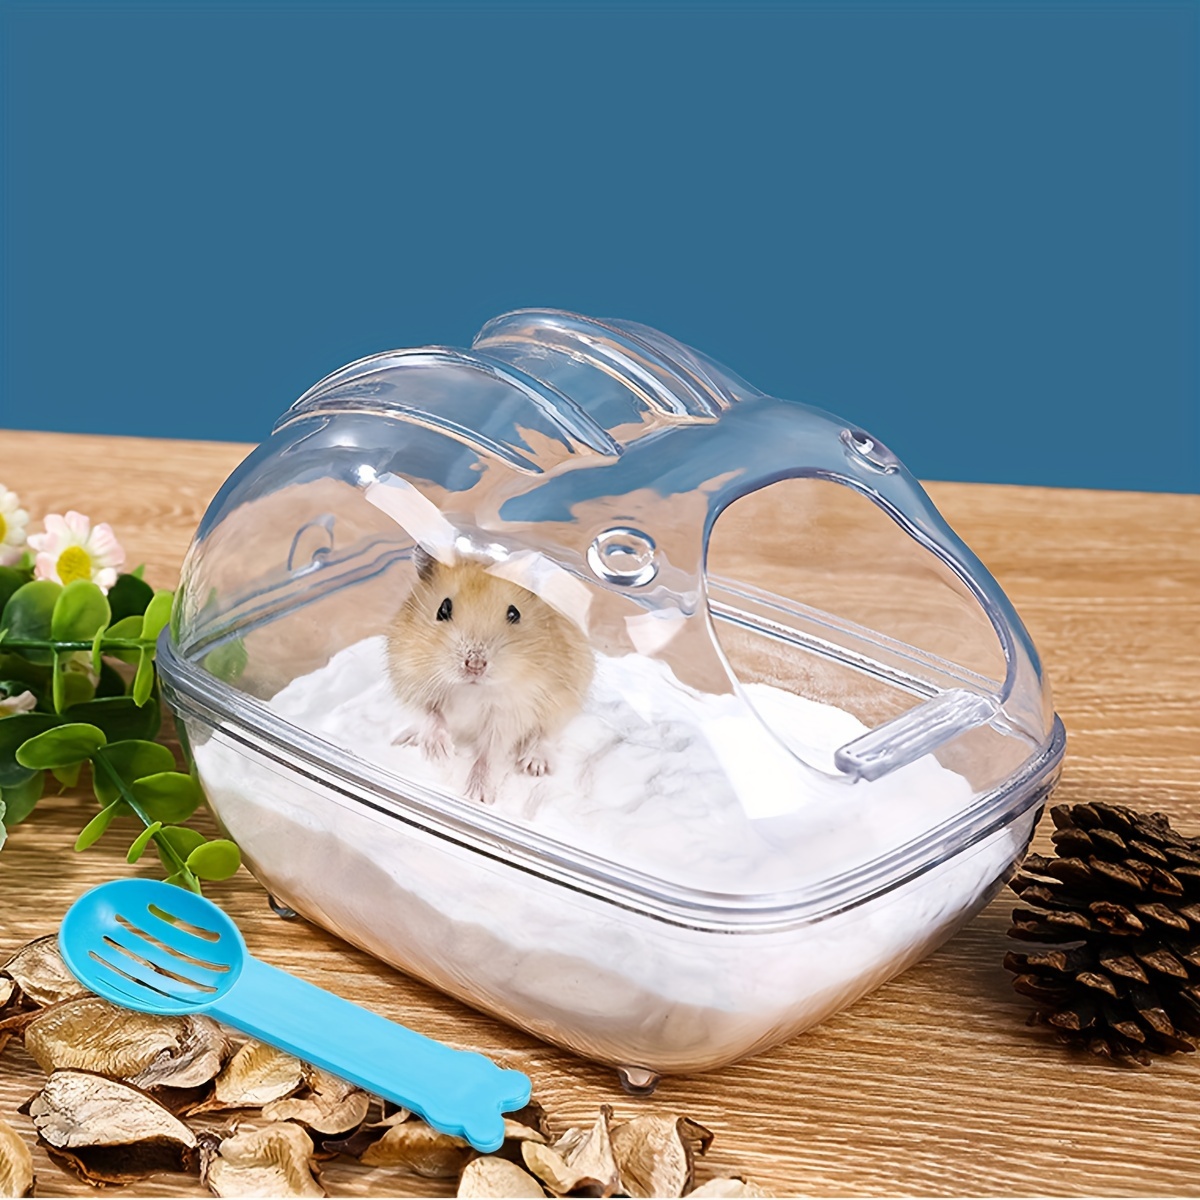 Hamsters, Gerbils, Rats and Mice